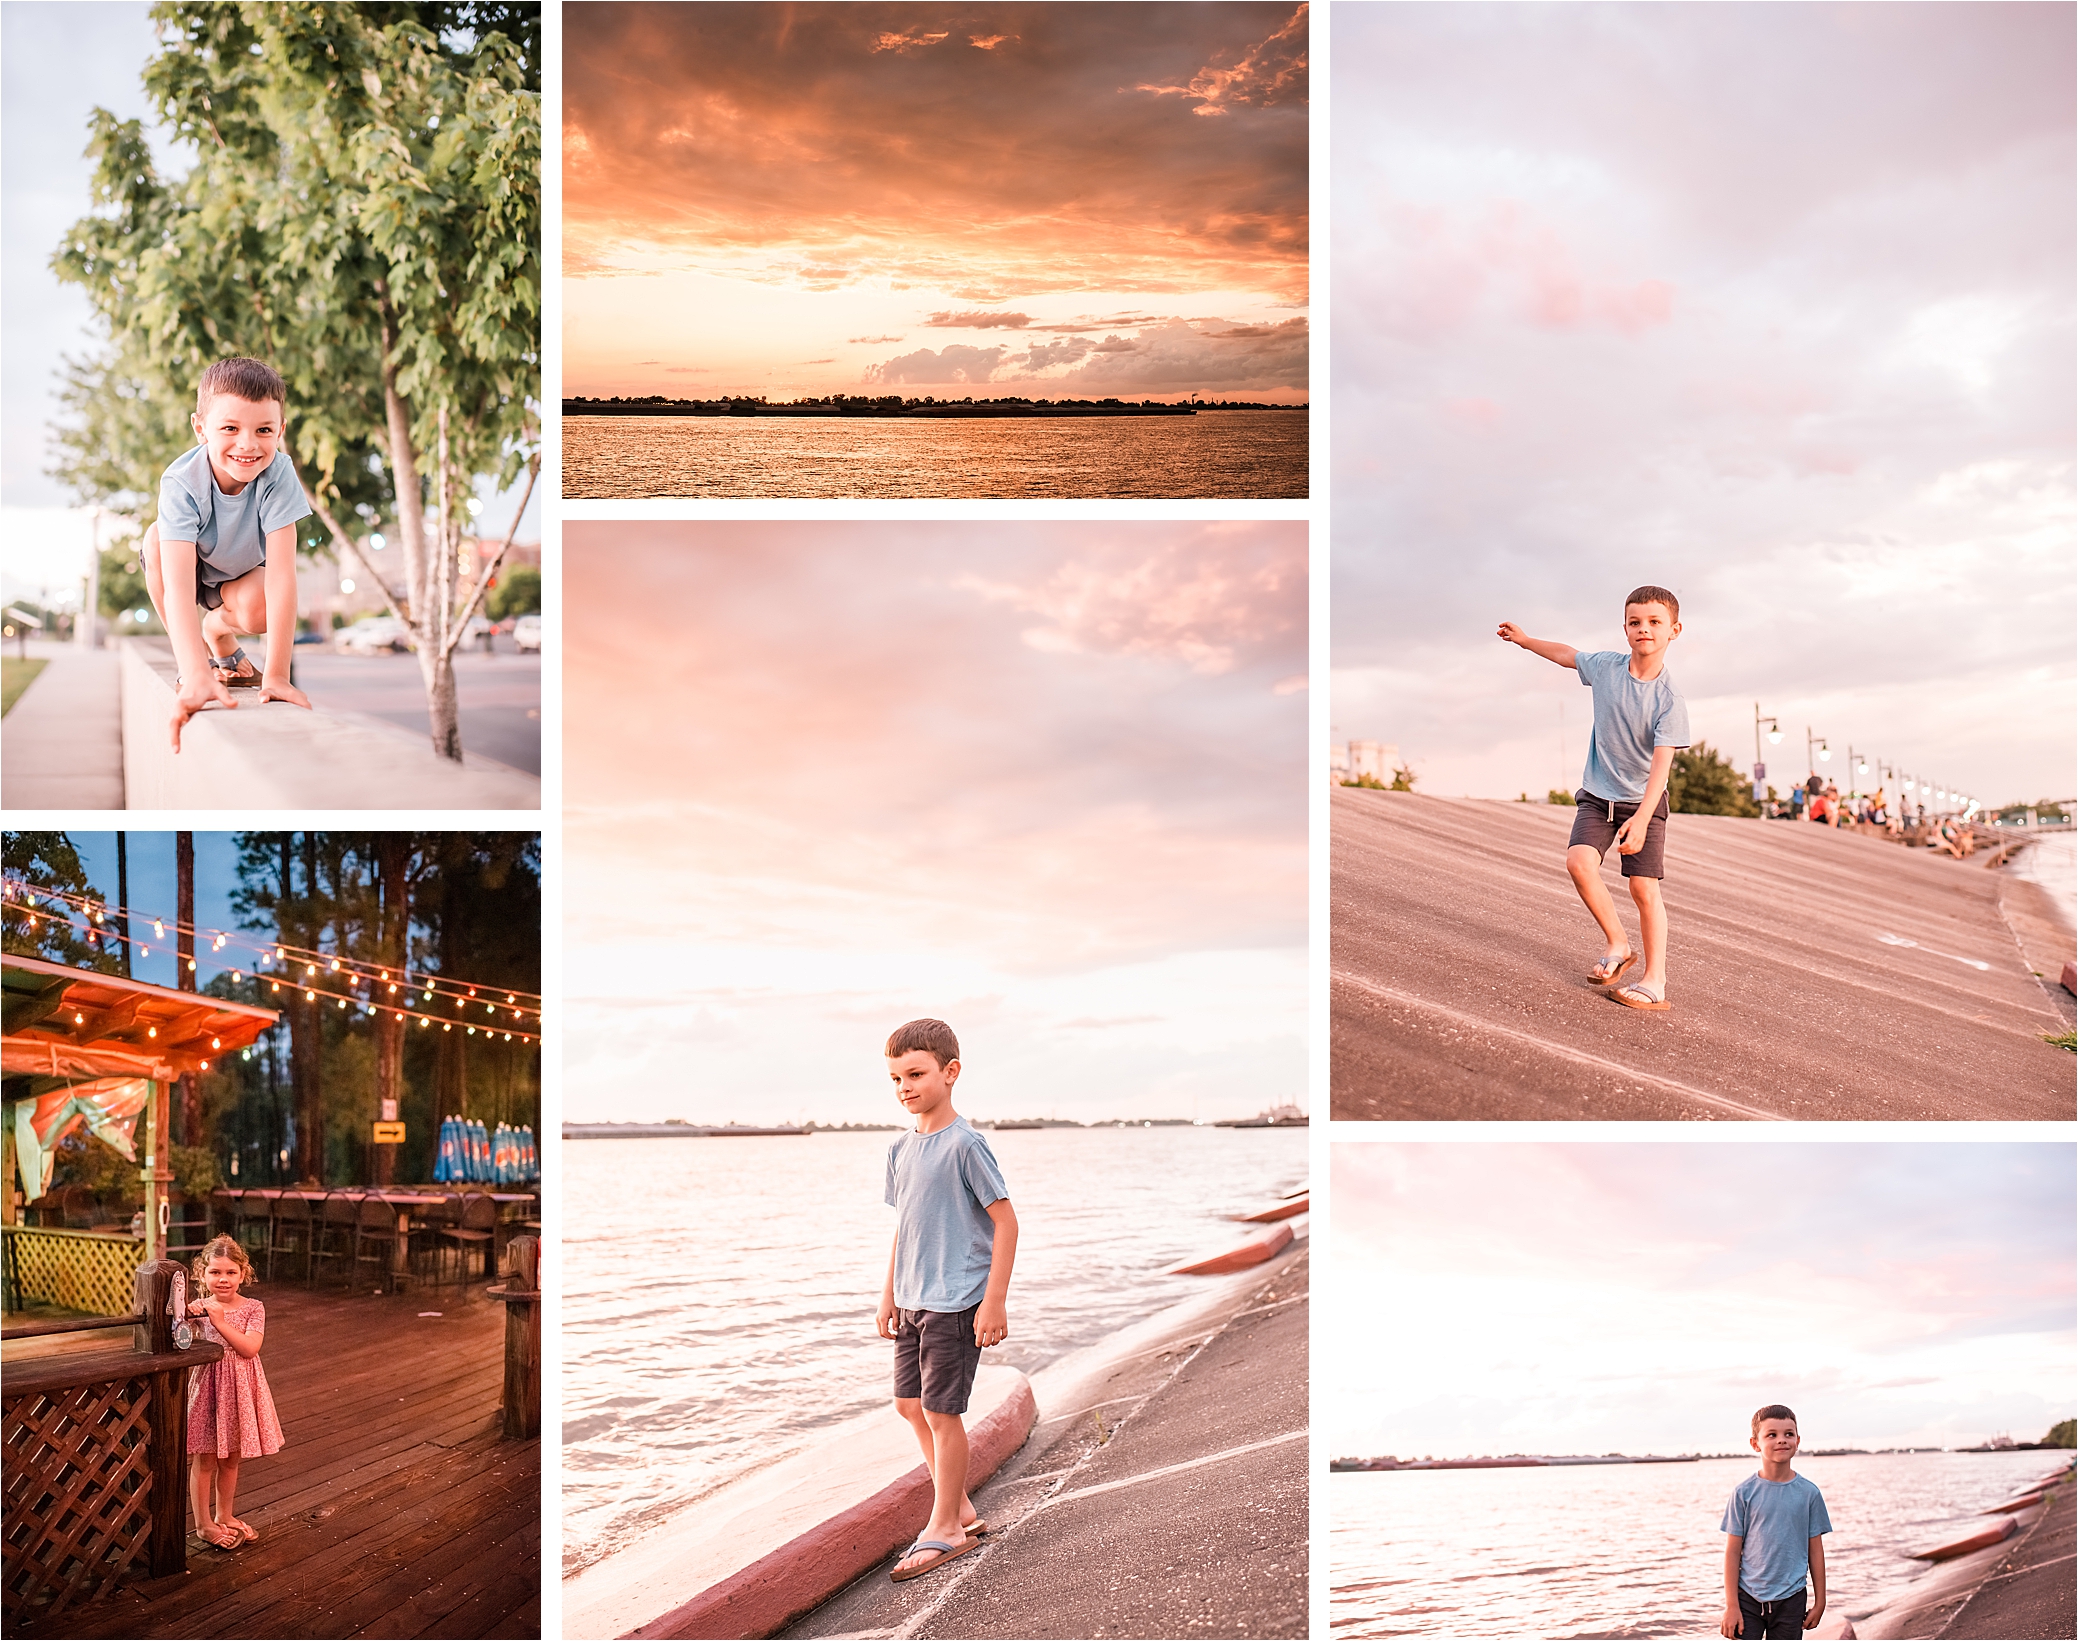 Boy at Sunset in Baton Rouge, Louisiana, on the Mississippi River